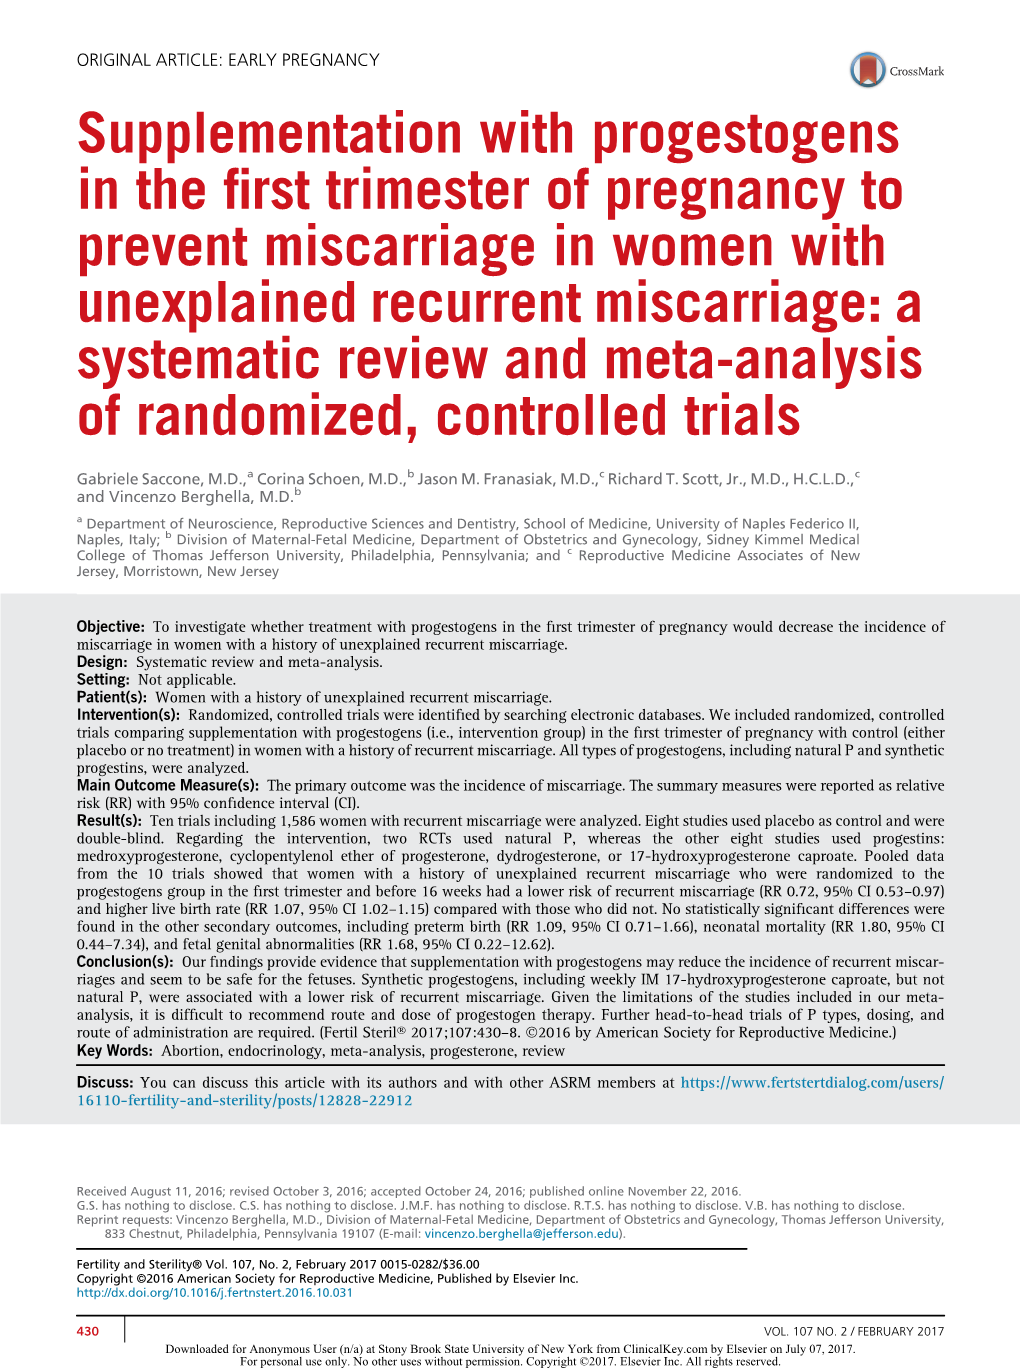 Supplementation with Progestogens in the First Trimester of Pregnancy to Prevent Miscarriage in Women with Unexplained Recurrent